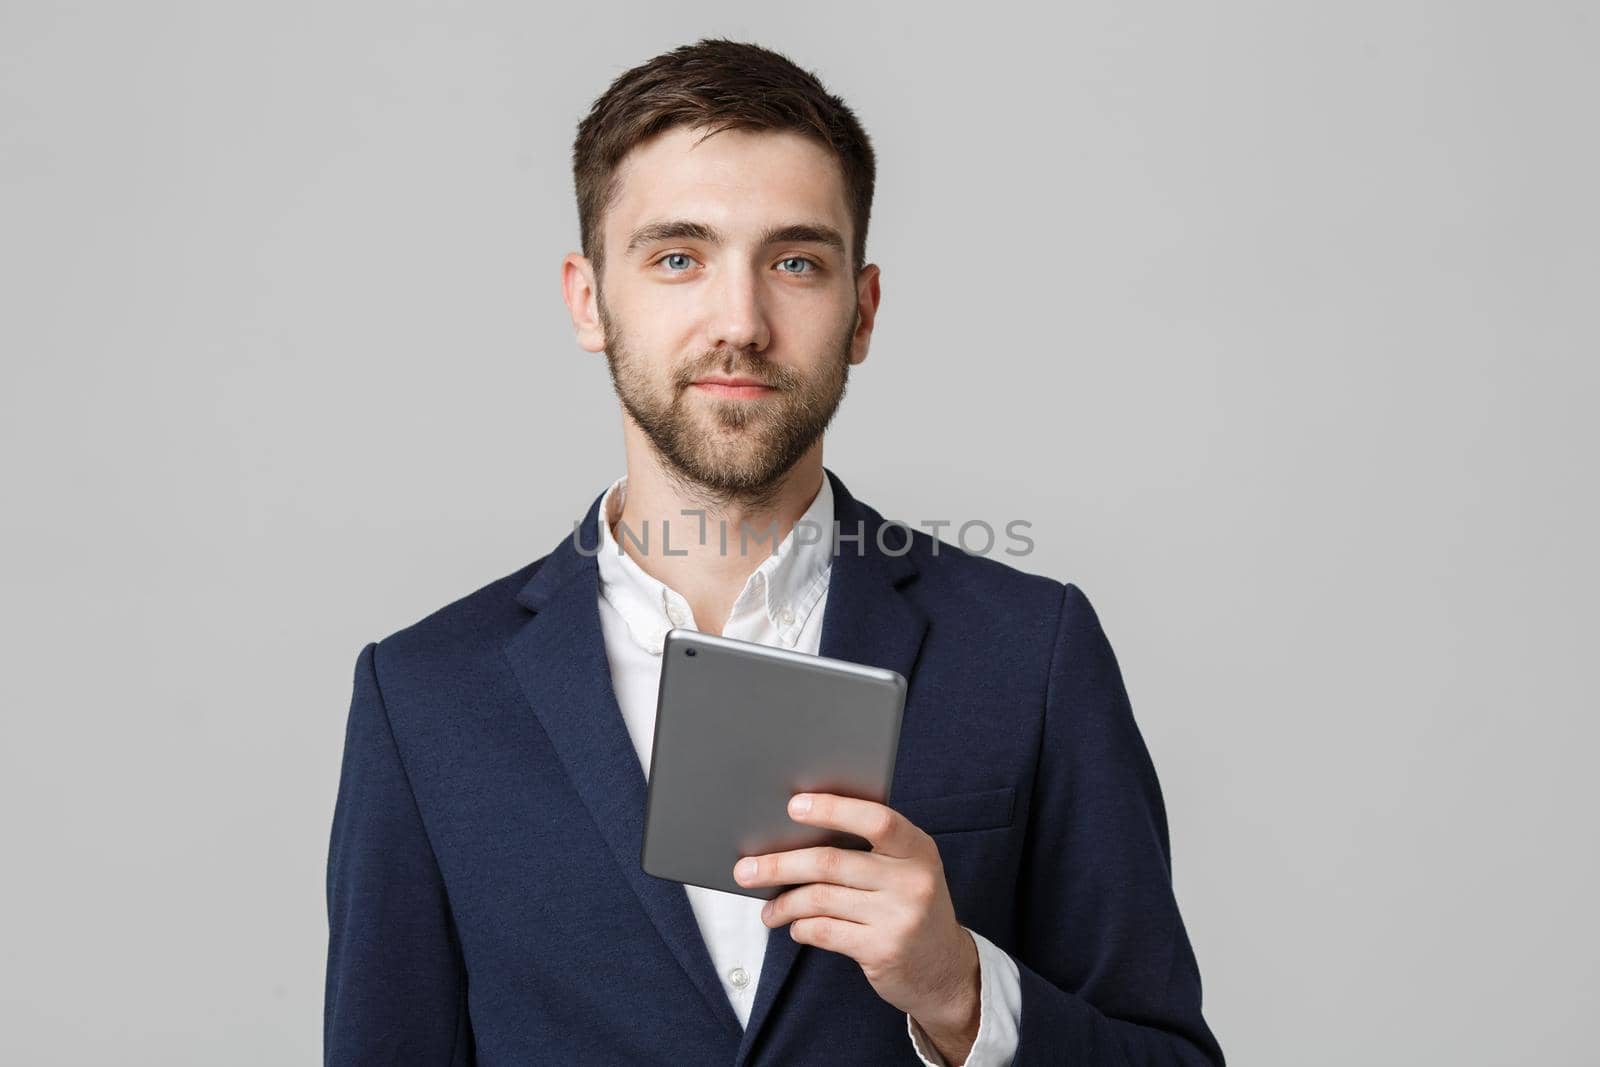 Business Concept - Portrait Handsome Business man playing digital tablet with smiling confident face. White Background. Copy Space.